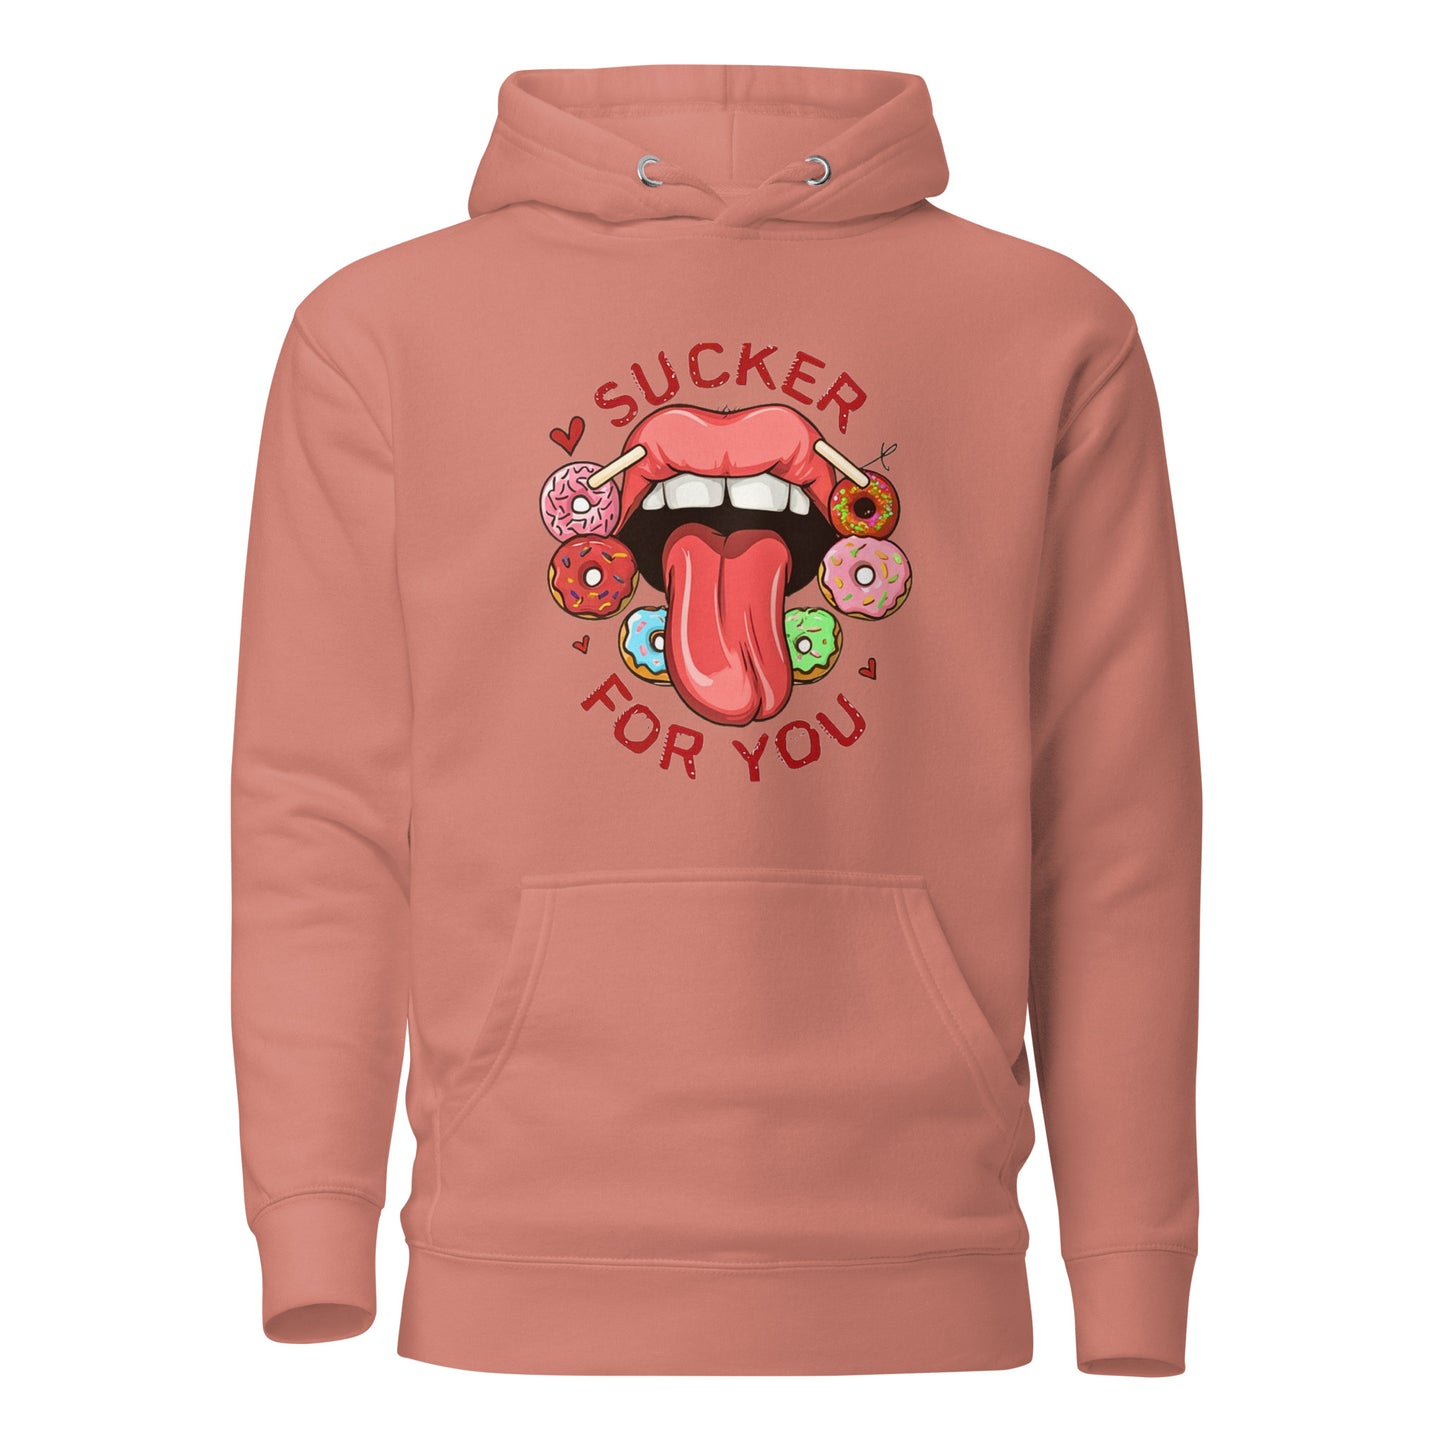 Sucker For You Hoodie, Sucker For You Crewneck "Sucker For You" Hoodie! 💖 🍭💑 love, hoodie, unisex hodies, knqv style